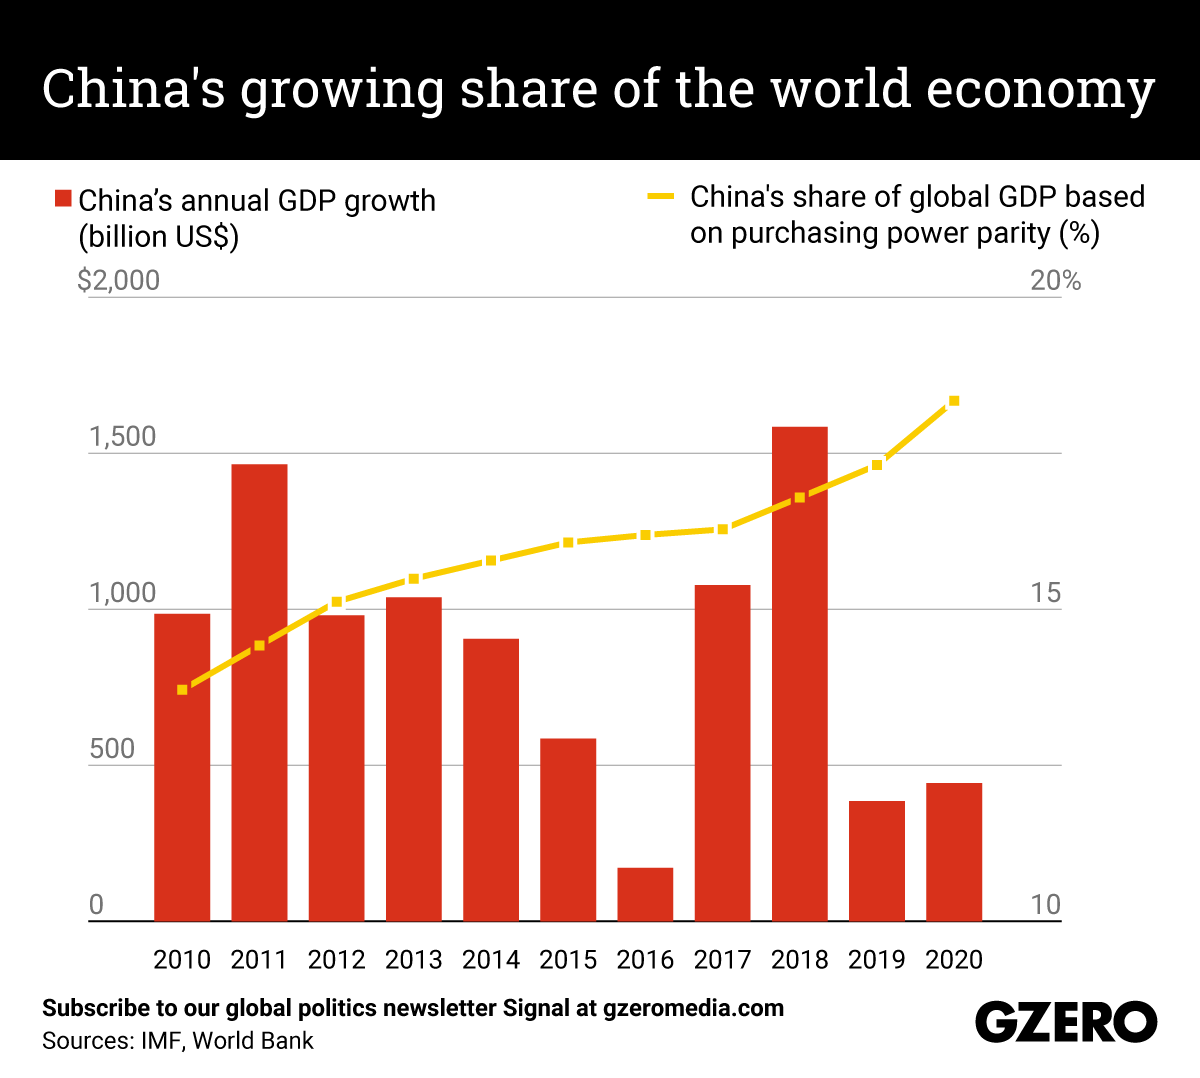 China's growing share of the world economy